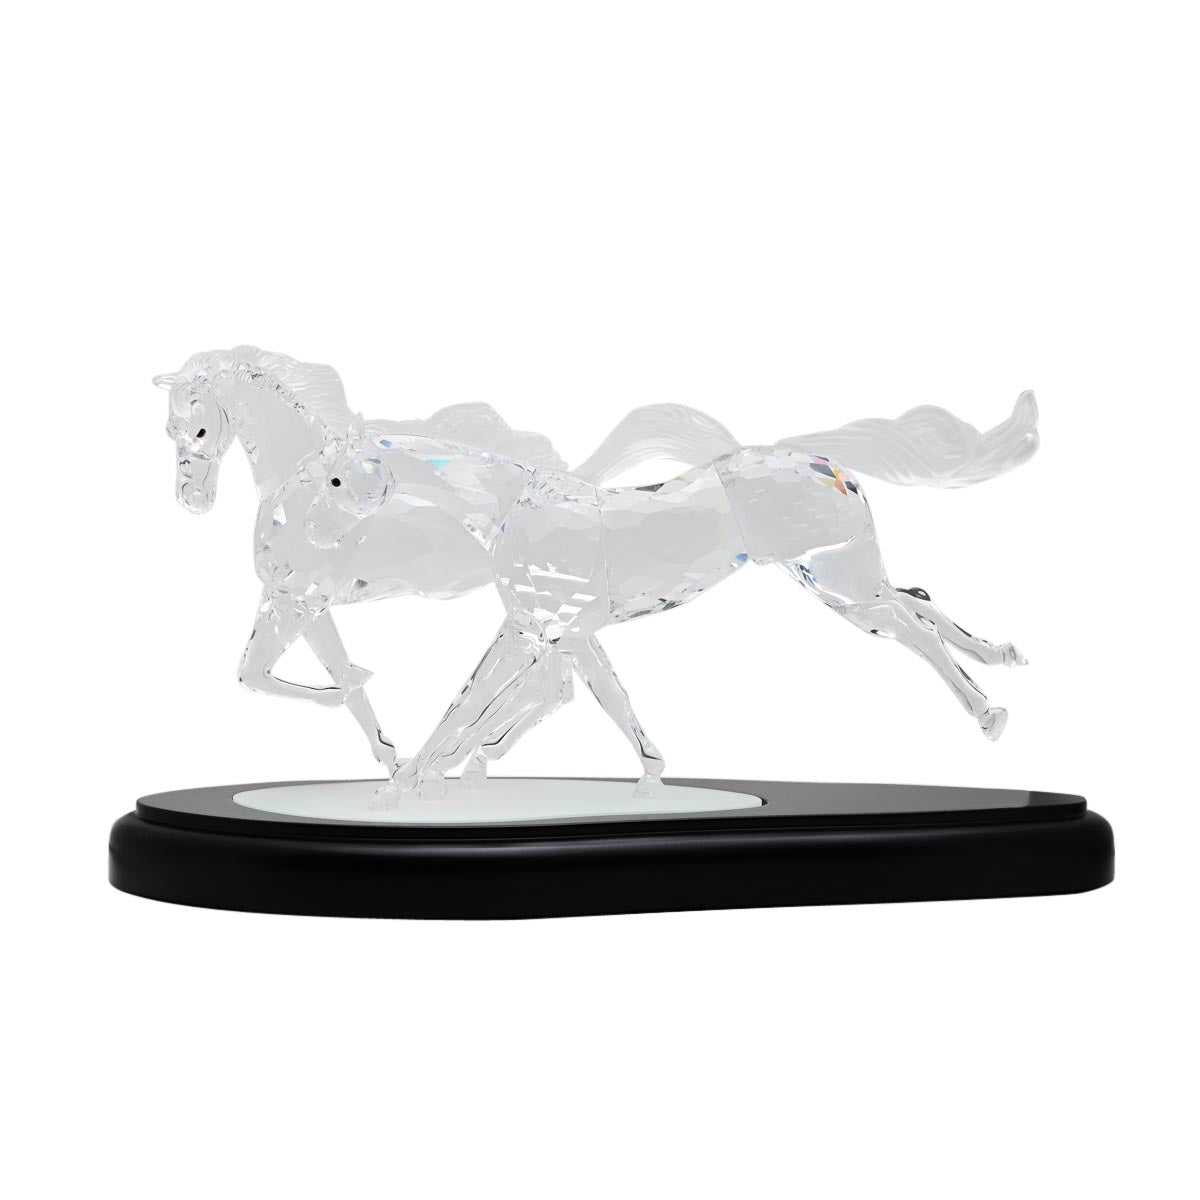 Swarovski Crystal Retired 2015 Limited Collector Edition Wild Horses